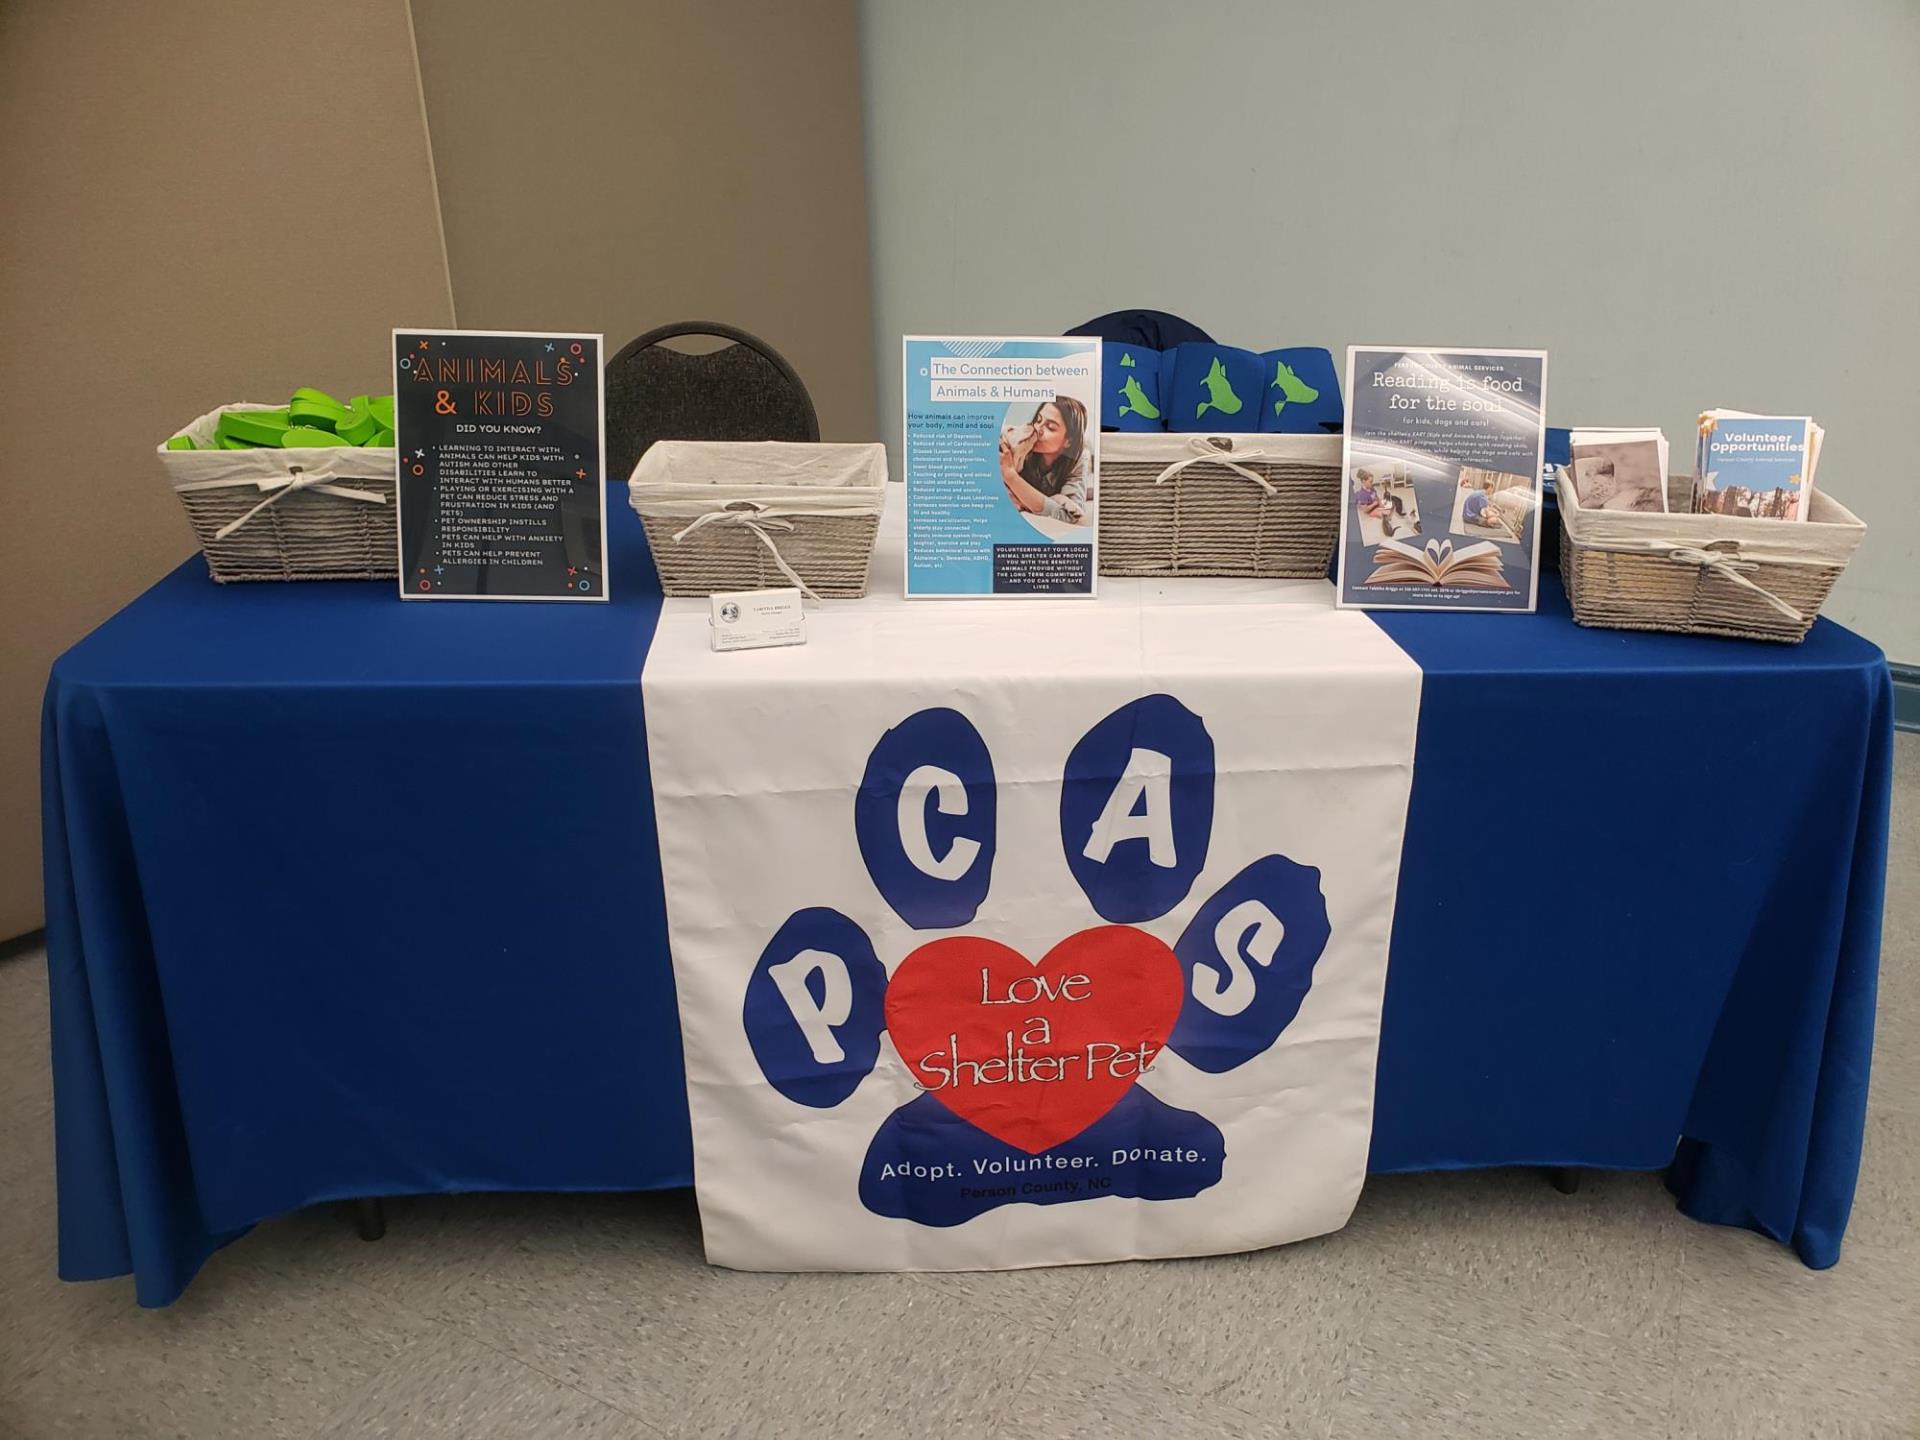 event table with blue tablecloth and PCAS logo